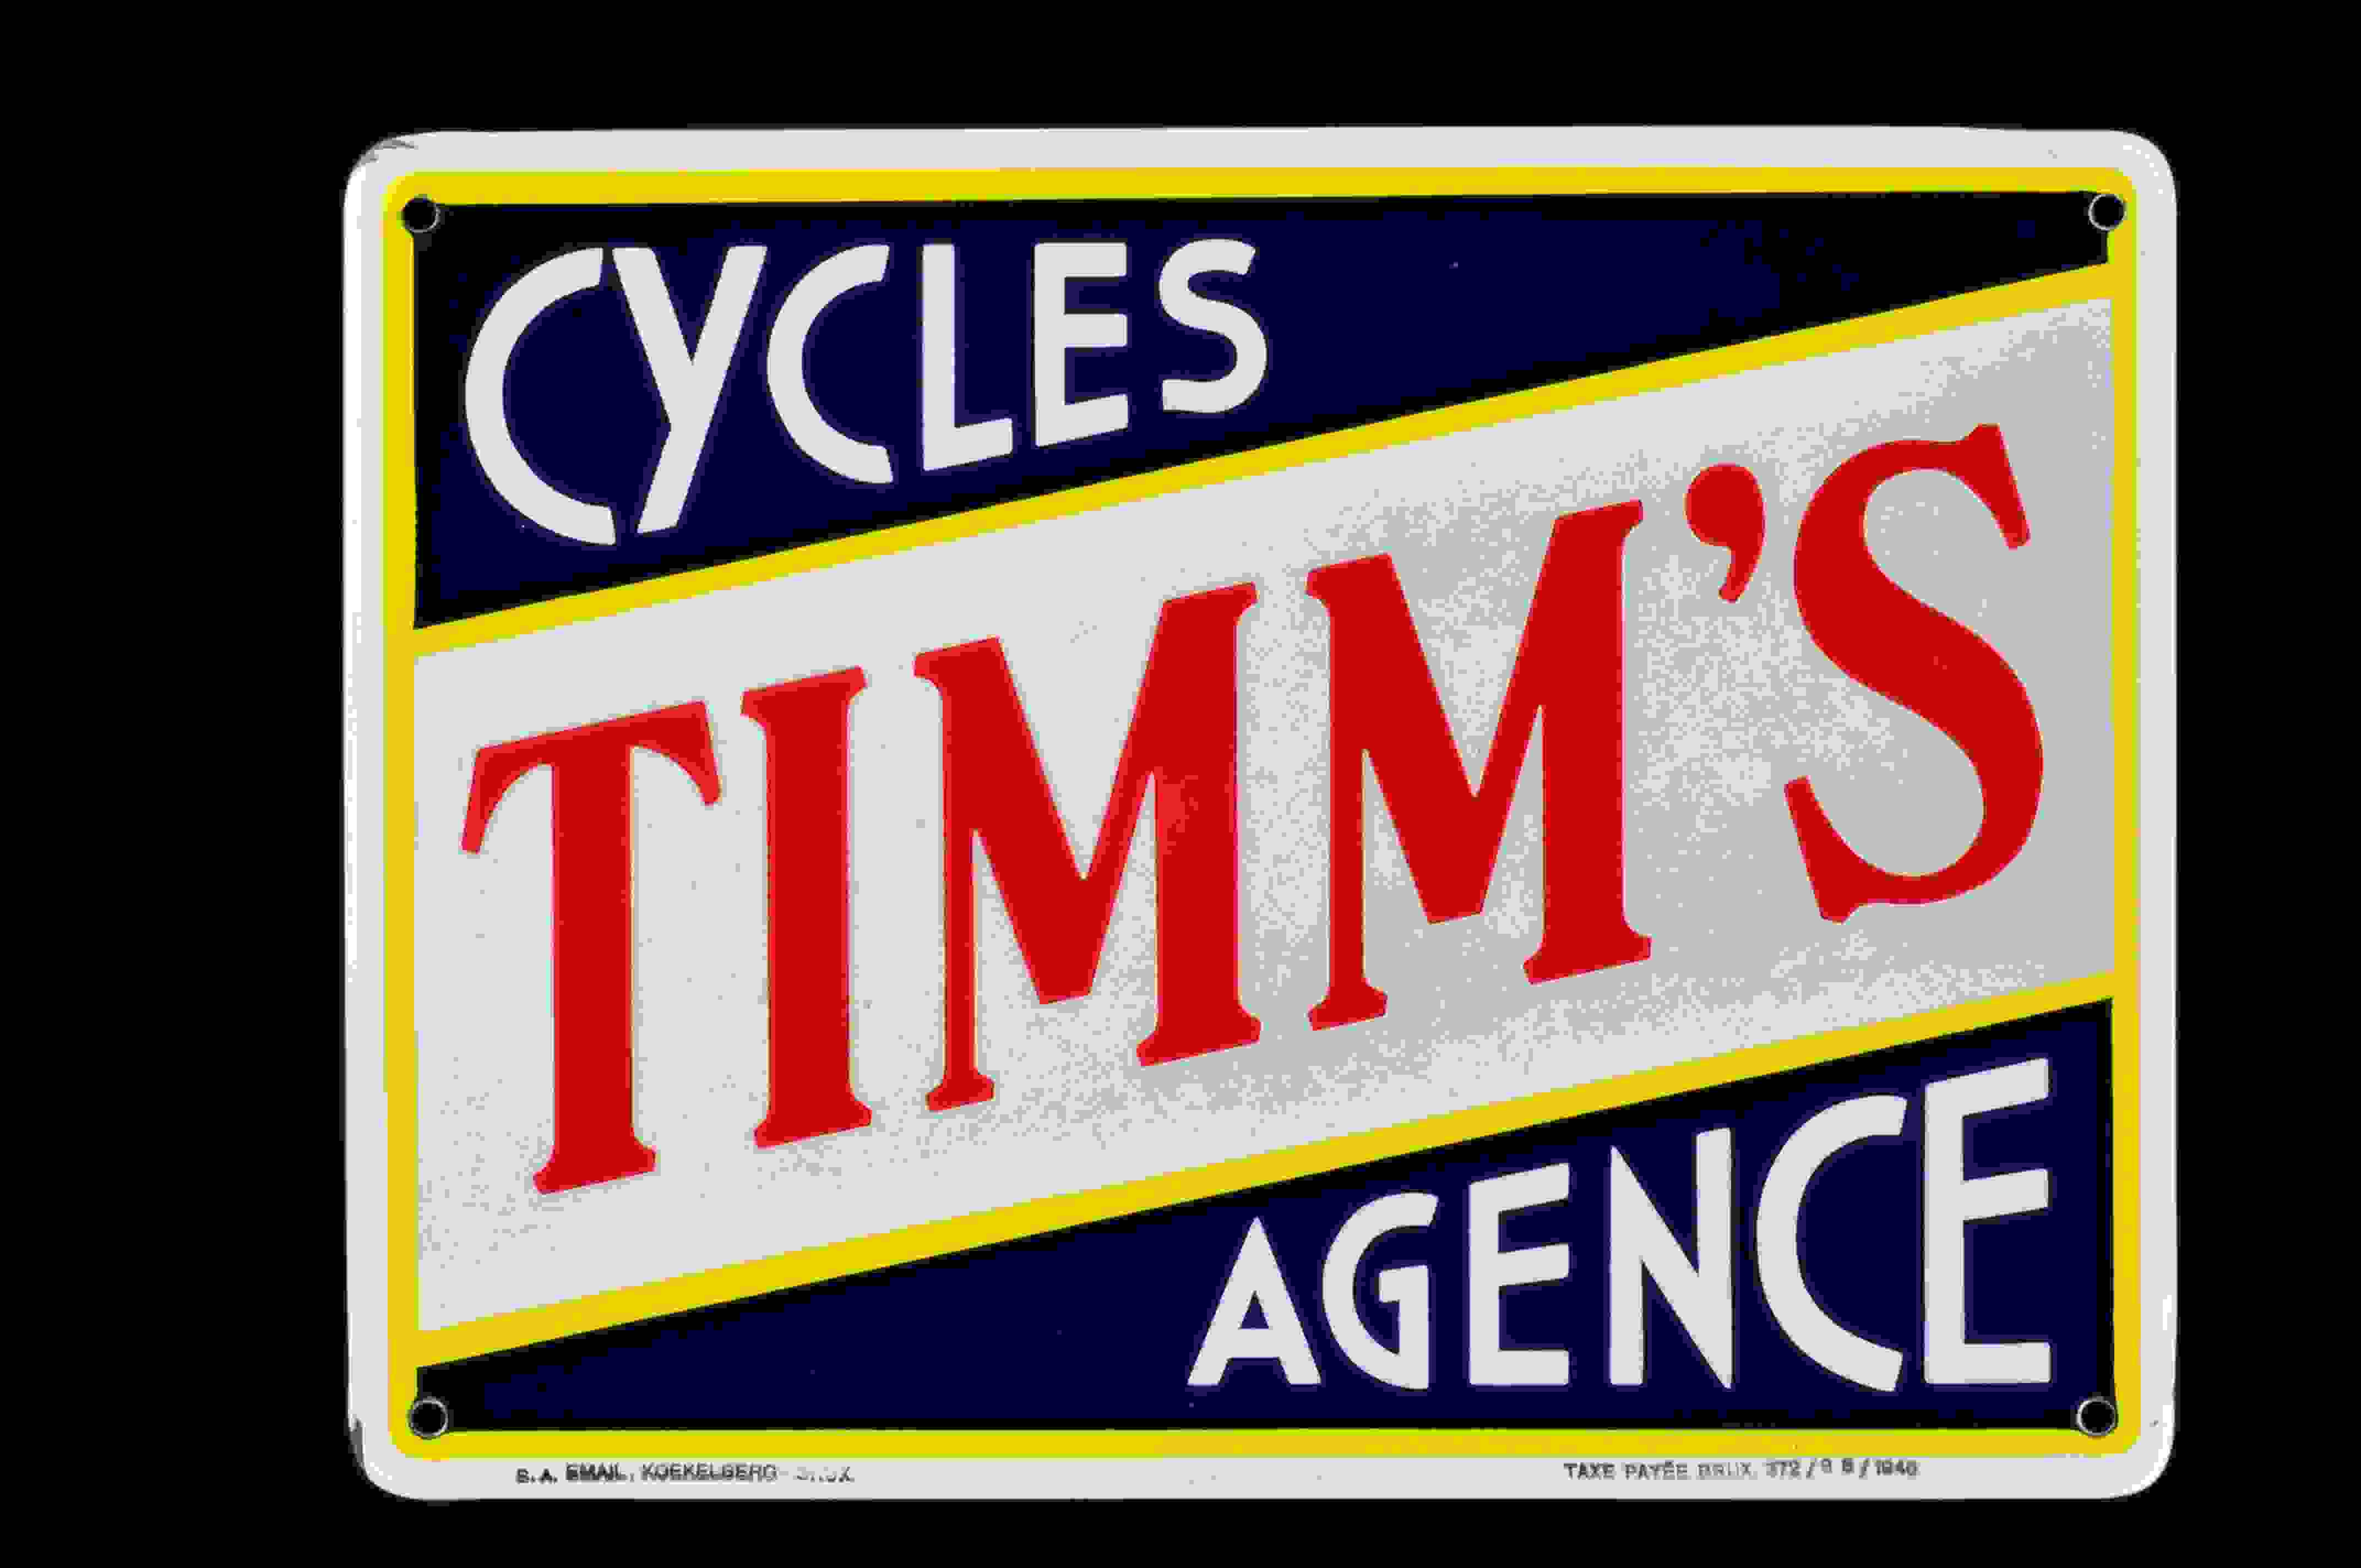 Timm's Cycles 